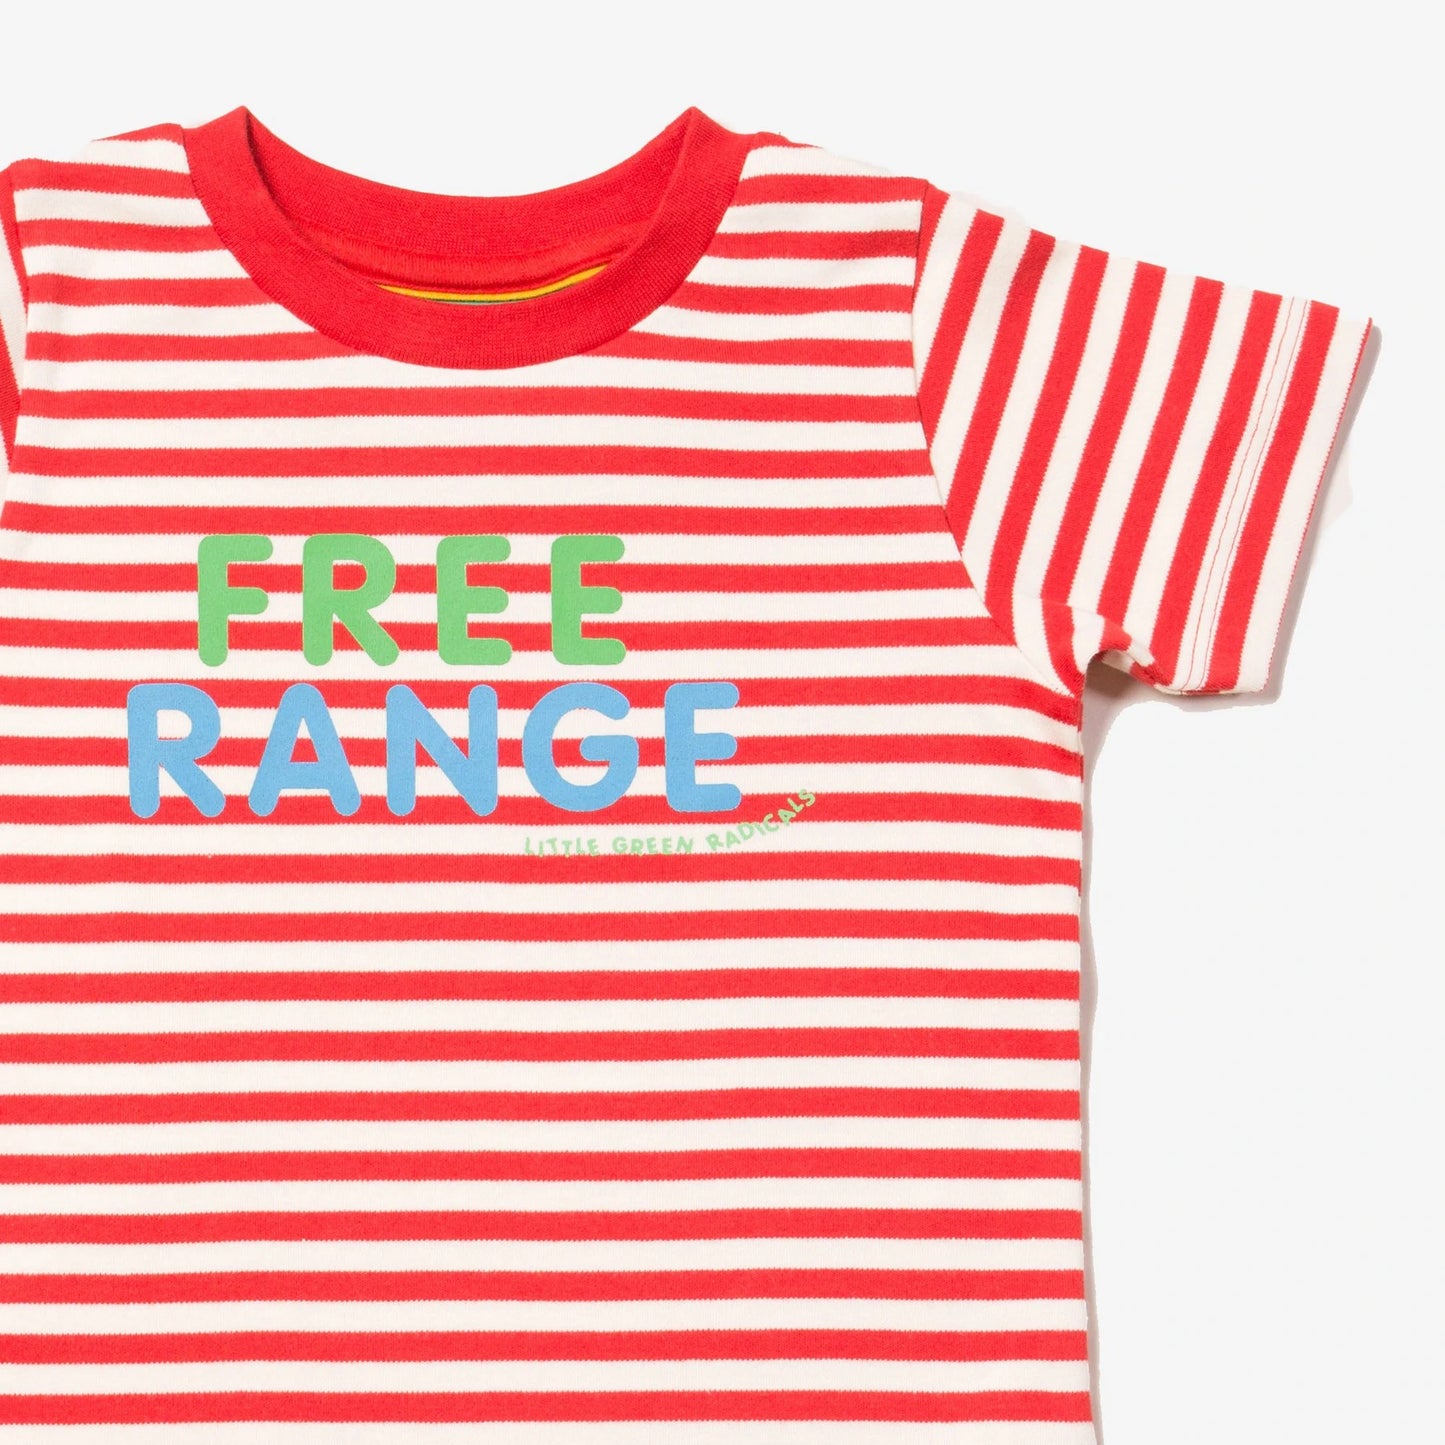 red and white striped tee with green and white screen printed Free Range logo on the front